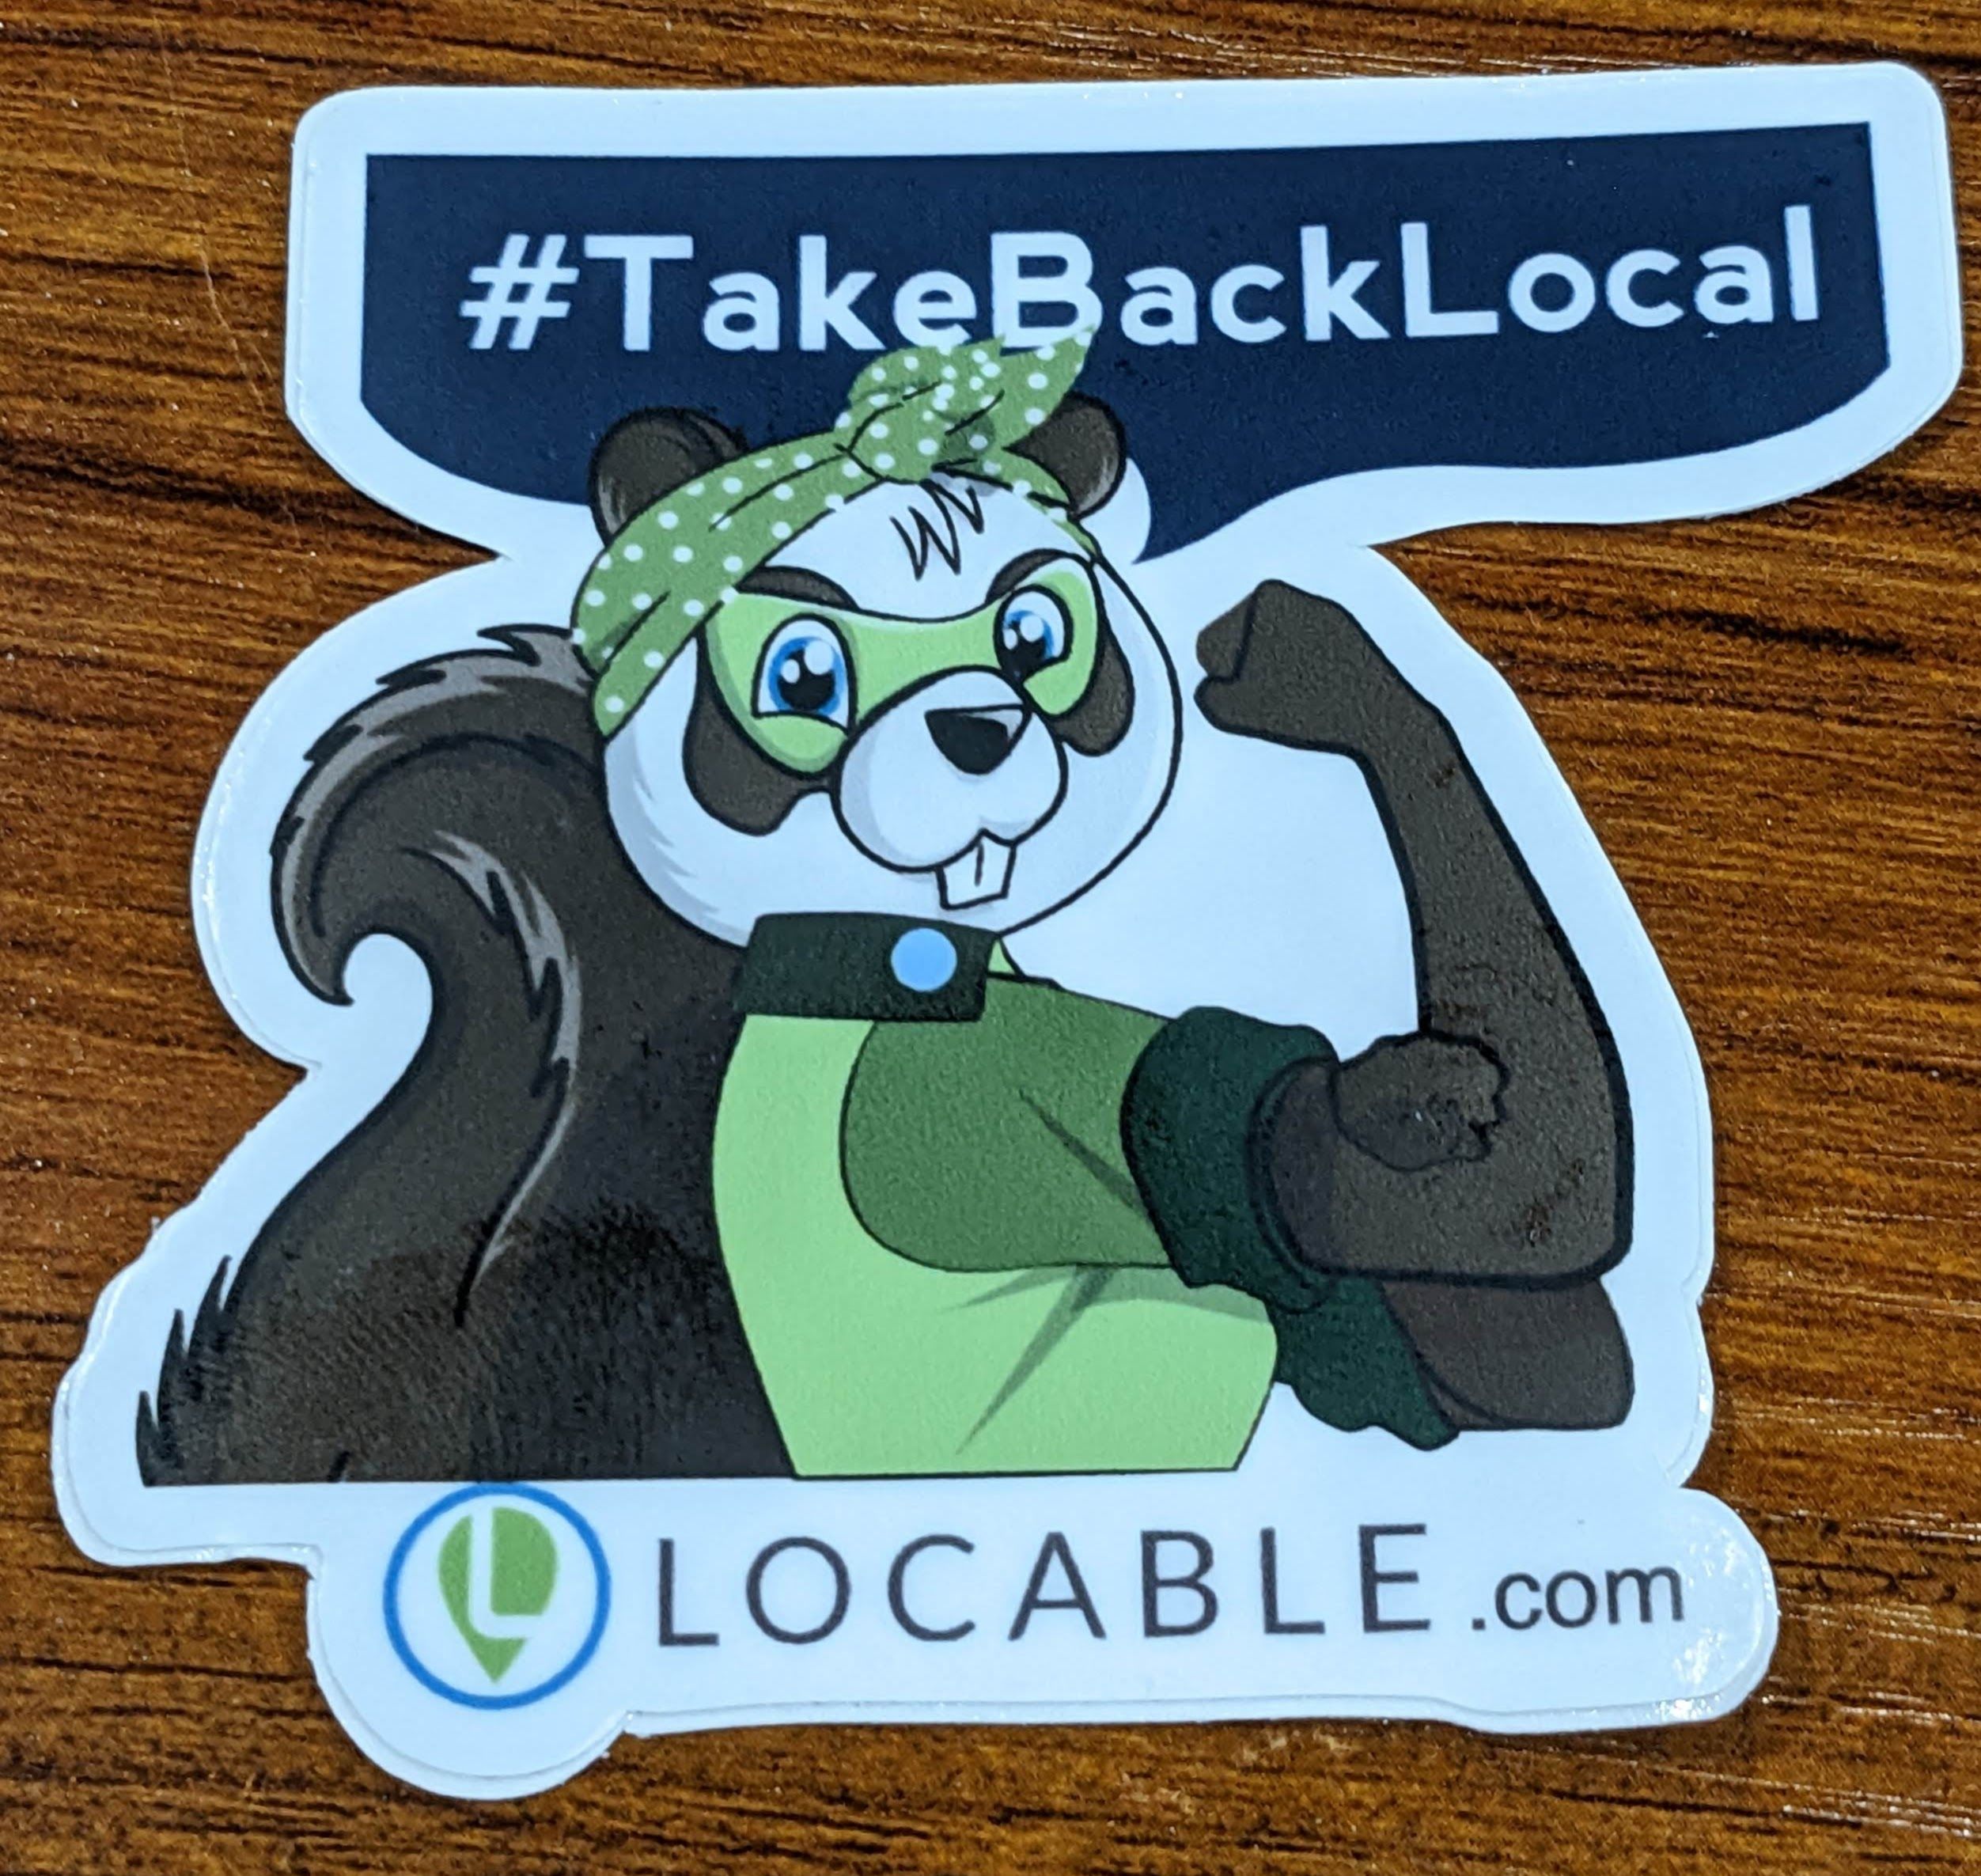 Beatrice #TakeBackLocal Sticker (Inspired by Rosie the Riveter) Image